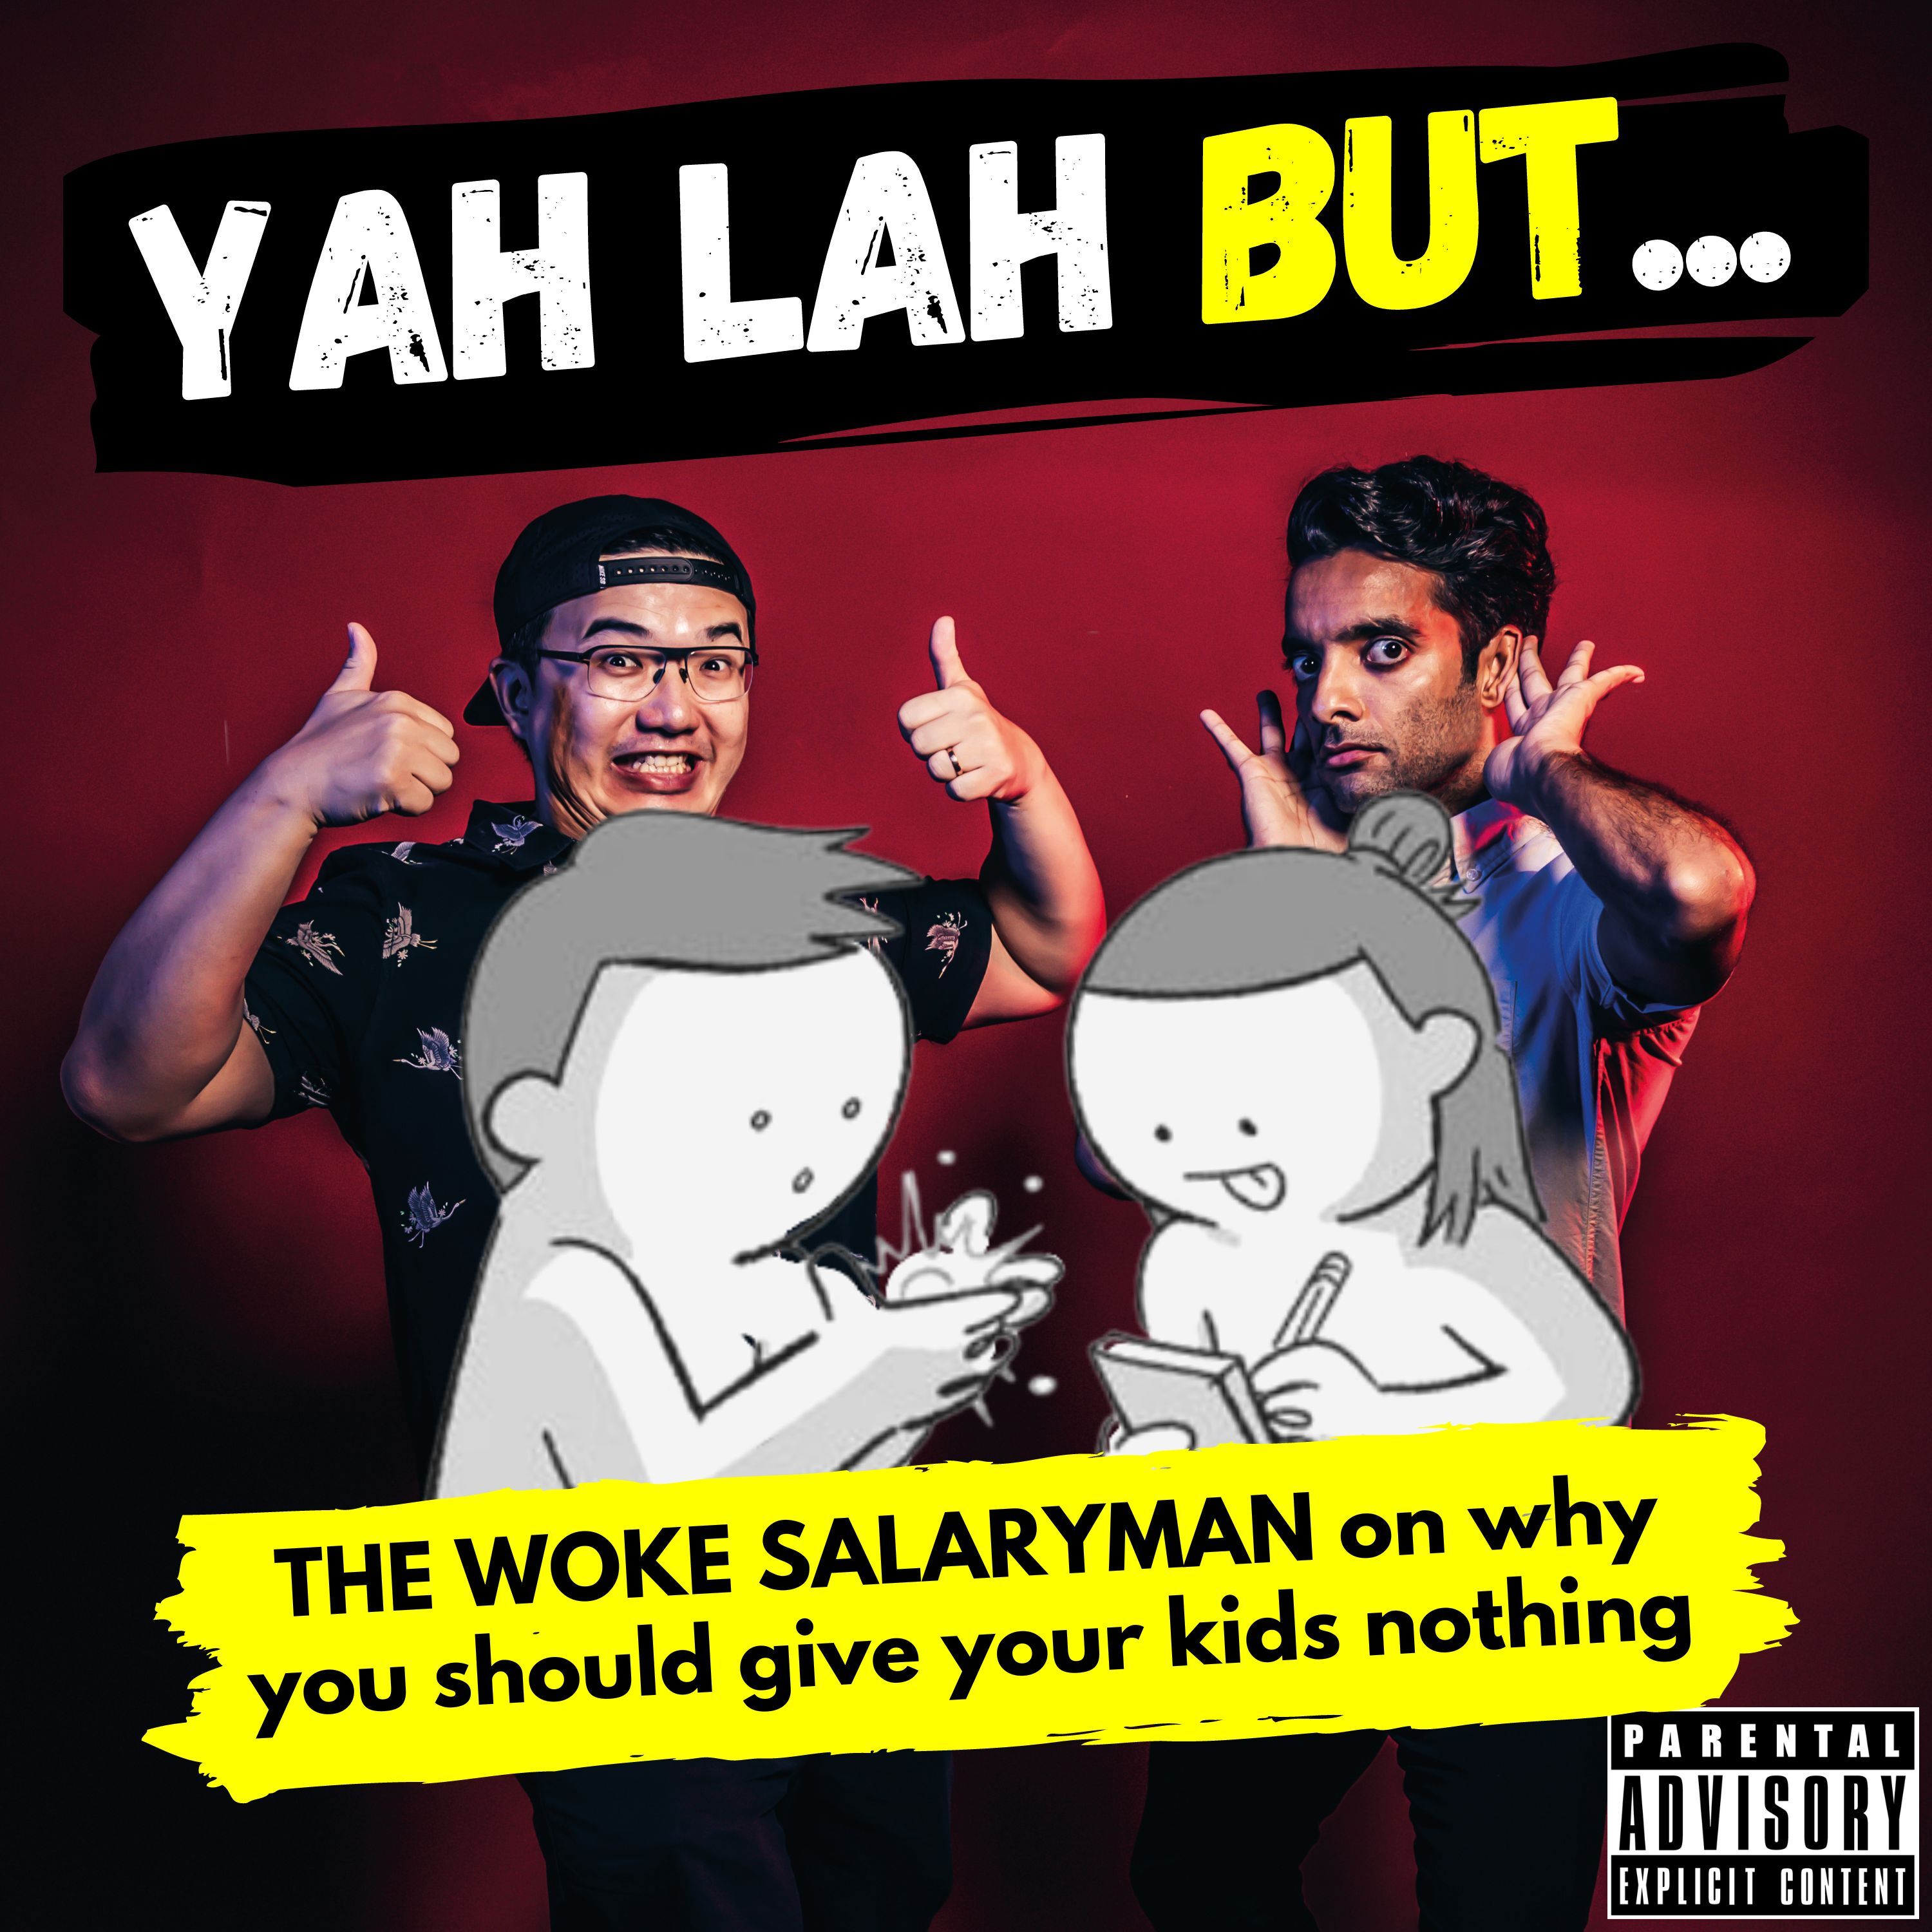 #310 - The Woke Salaryman on why you should give your kids nothing, how to earn more money, and why SG is awesome